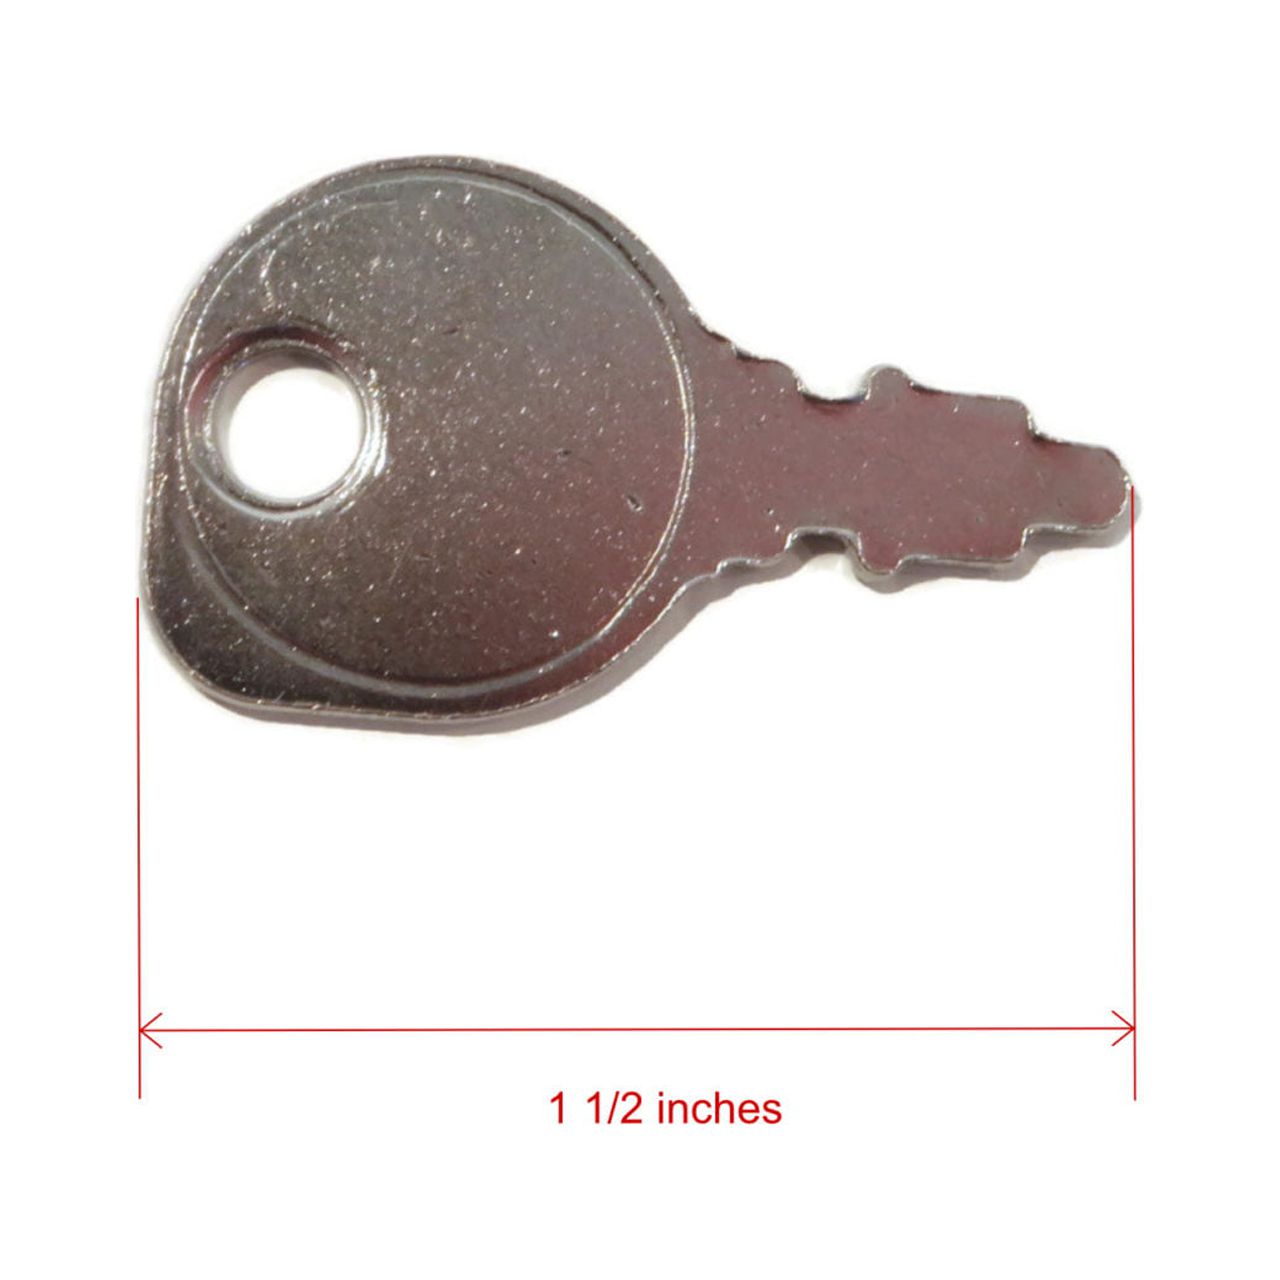 The ROP Shop | Starter Key For Briggs & Stratton 422707-1510-01, 422707-1511-01, 422707-1512-01 - image 2 of 5